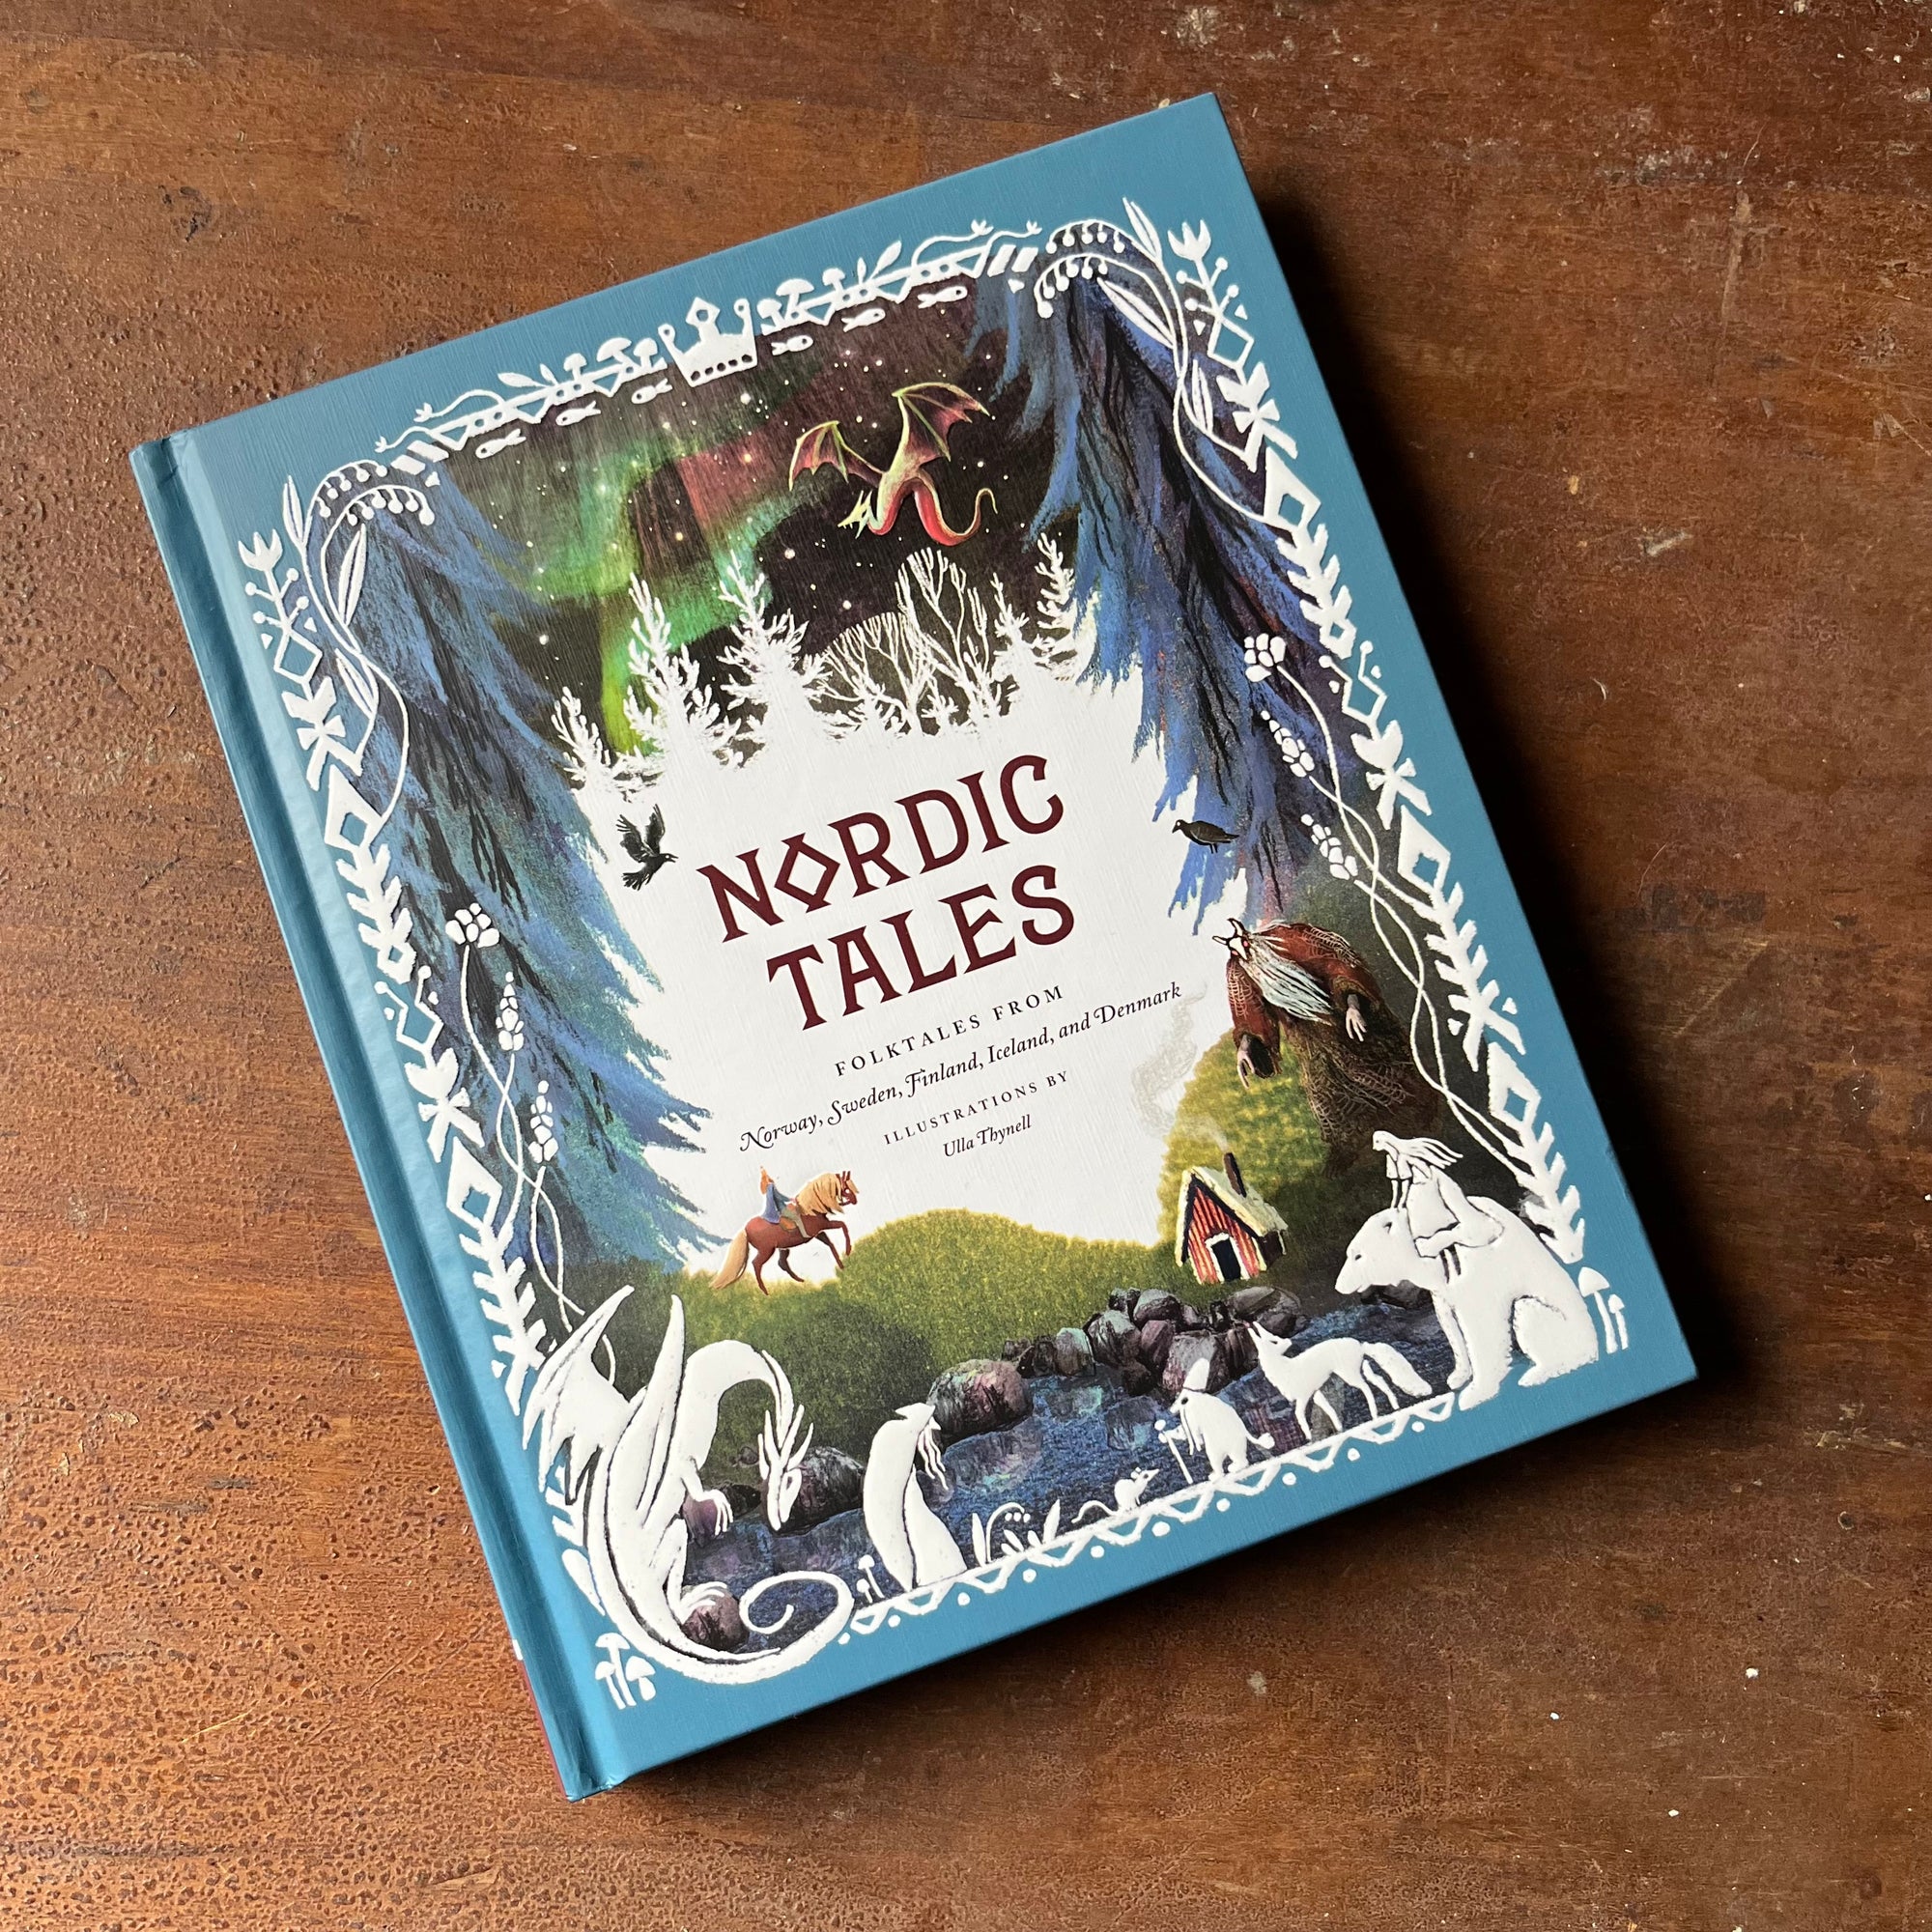 children's stories, folktales, fairy tales, stories of other lands - Nordic Tales Folktales From Norway, Sweden, Finland, Iceland and Denmark with illustrations by Ulla Thynell - view of the embossed front cover